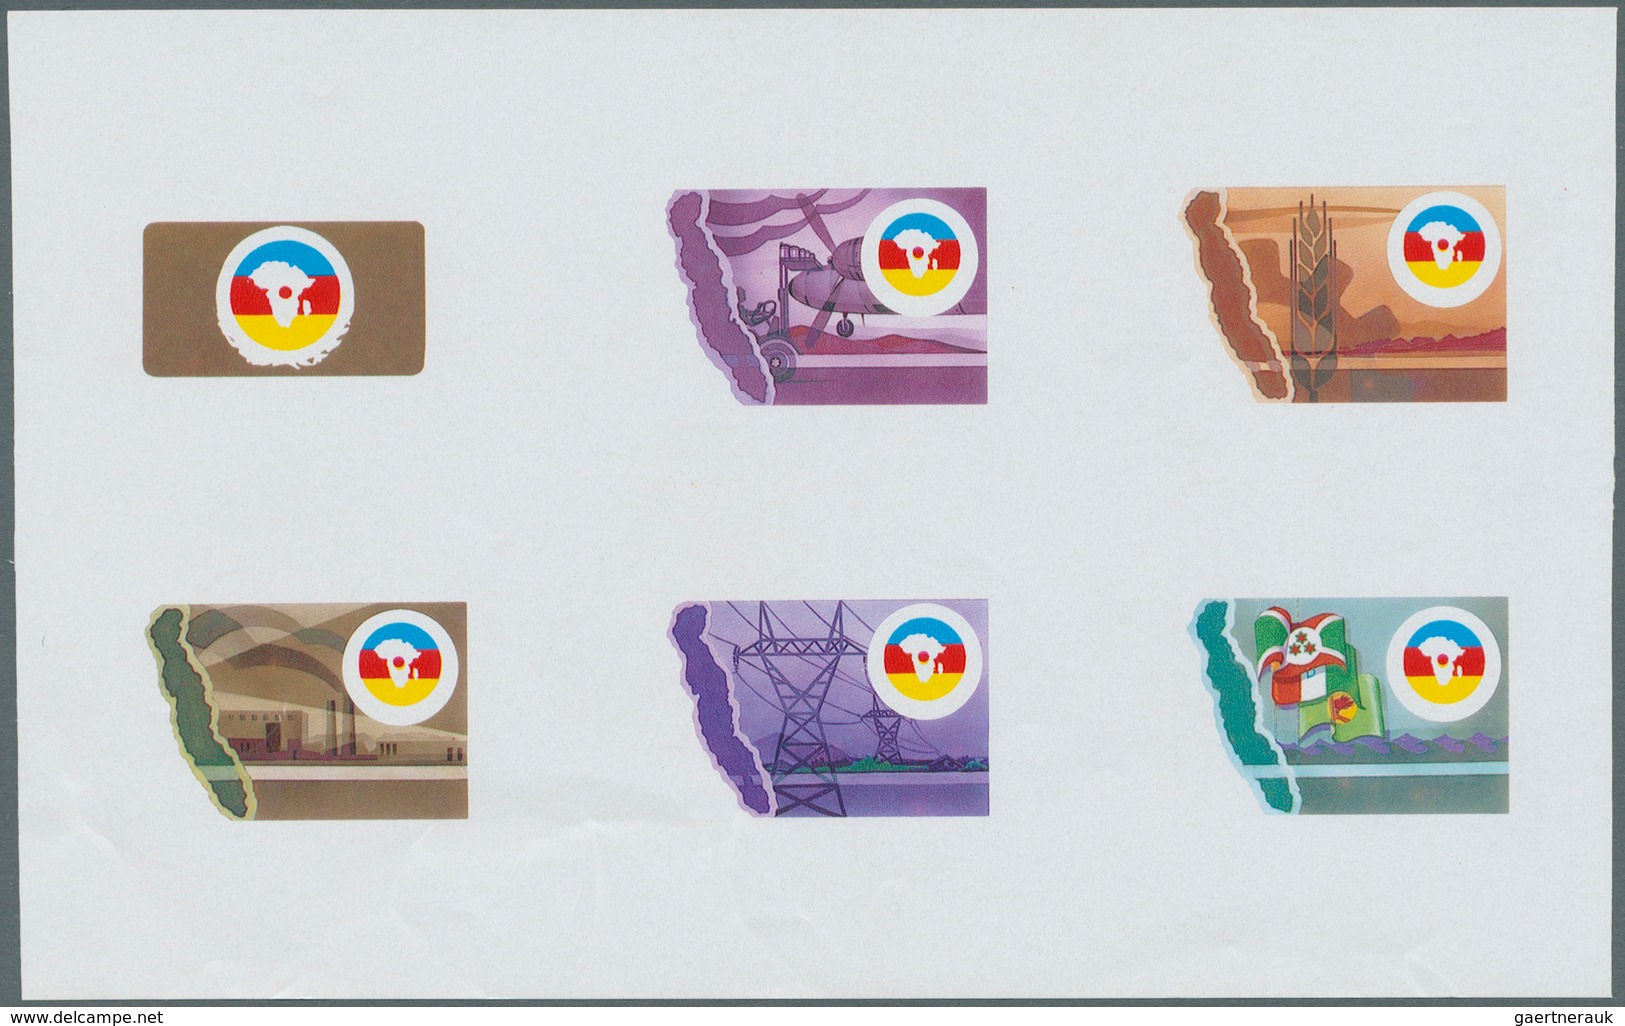 Burundi: 1986, collective 12 phased die and color proof for the complete set (5 values and 1 label)